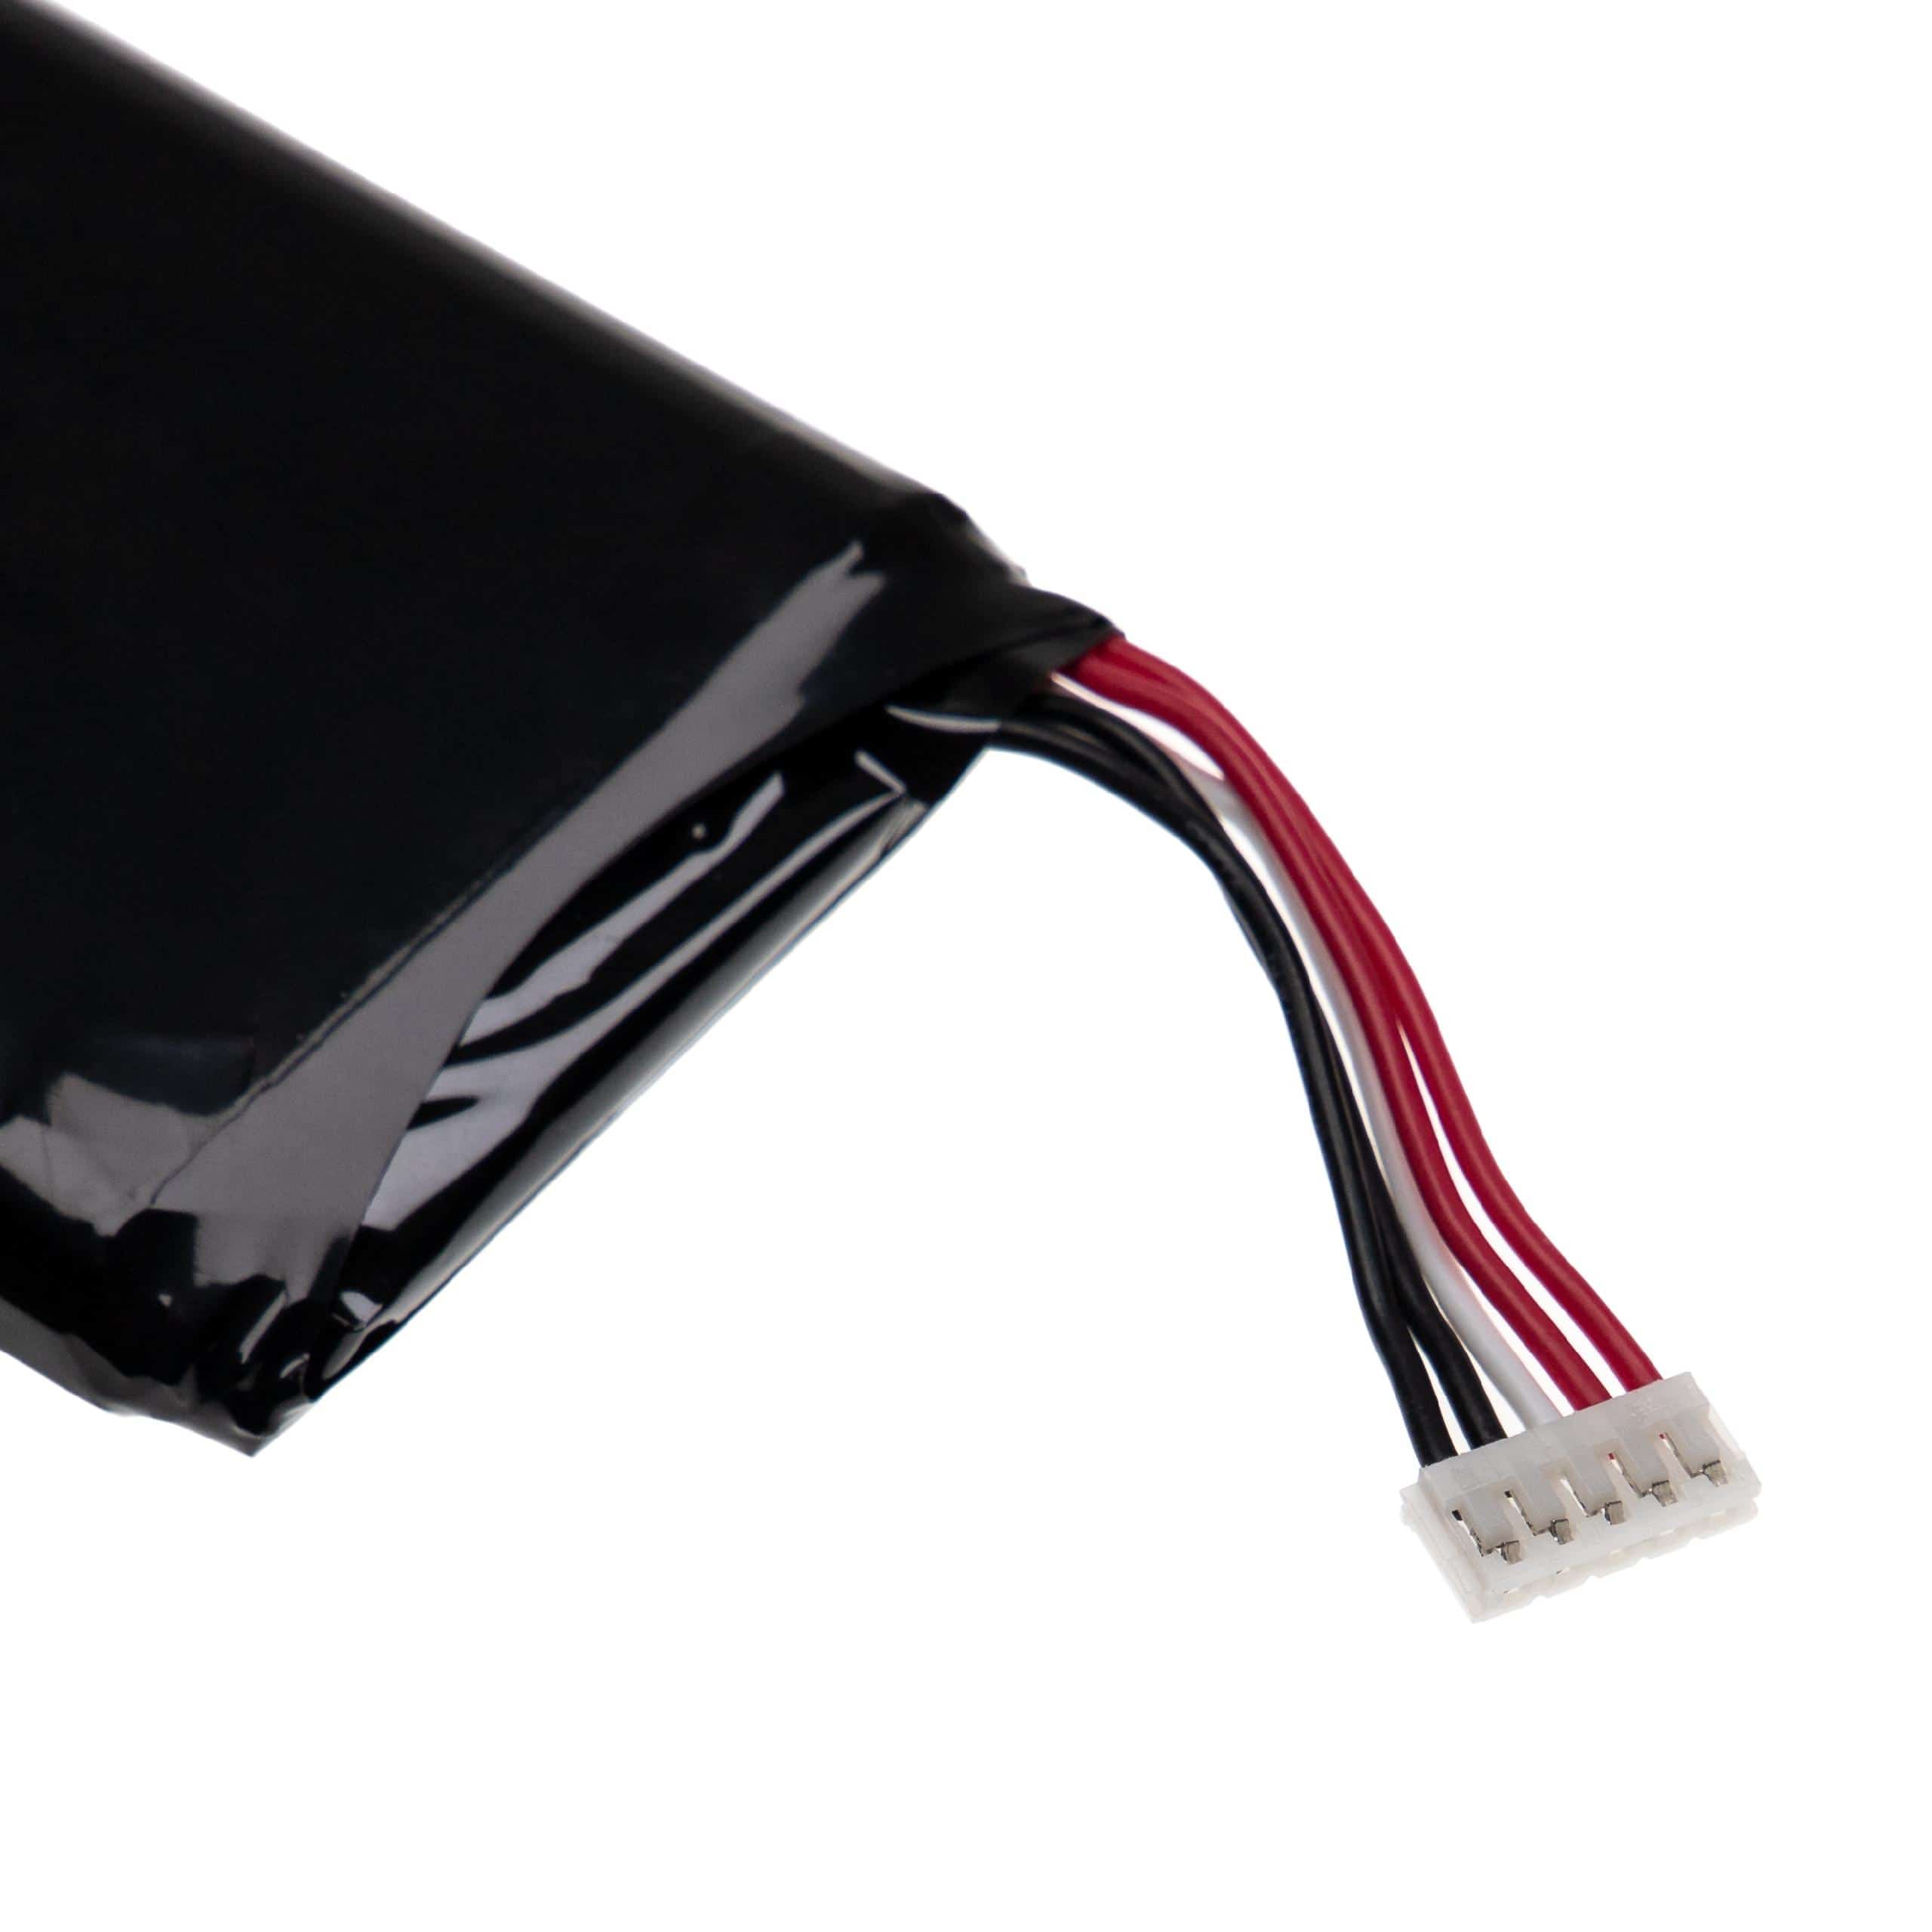 Laser Battery Replacement for EXFO 880X266, 01WQ0037-02, GP-2209 - 10000mAh 3.7V Li-polymer